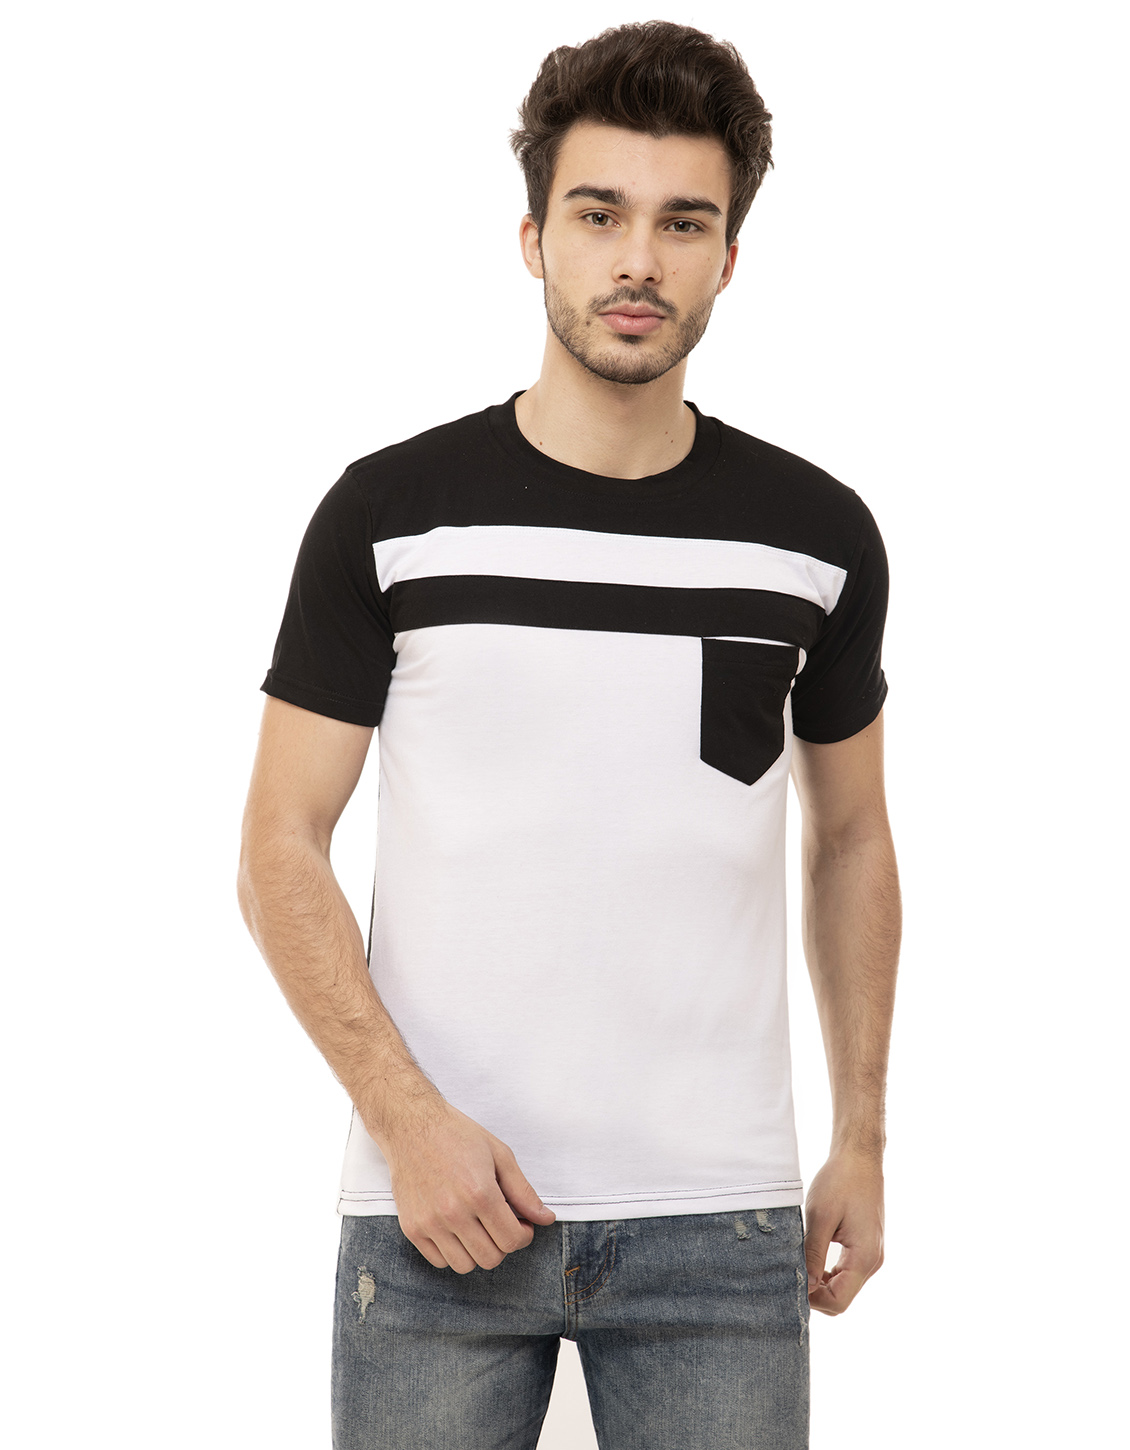 Buy Ample White Casual Men's T-Shirt Online @ ₹345 from ShopClues